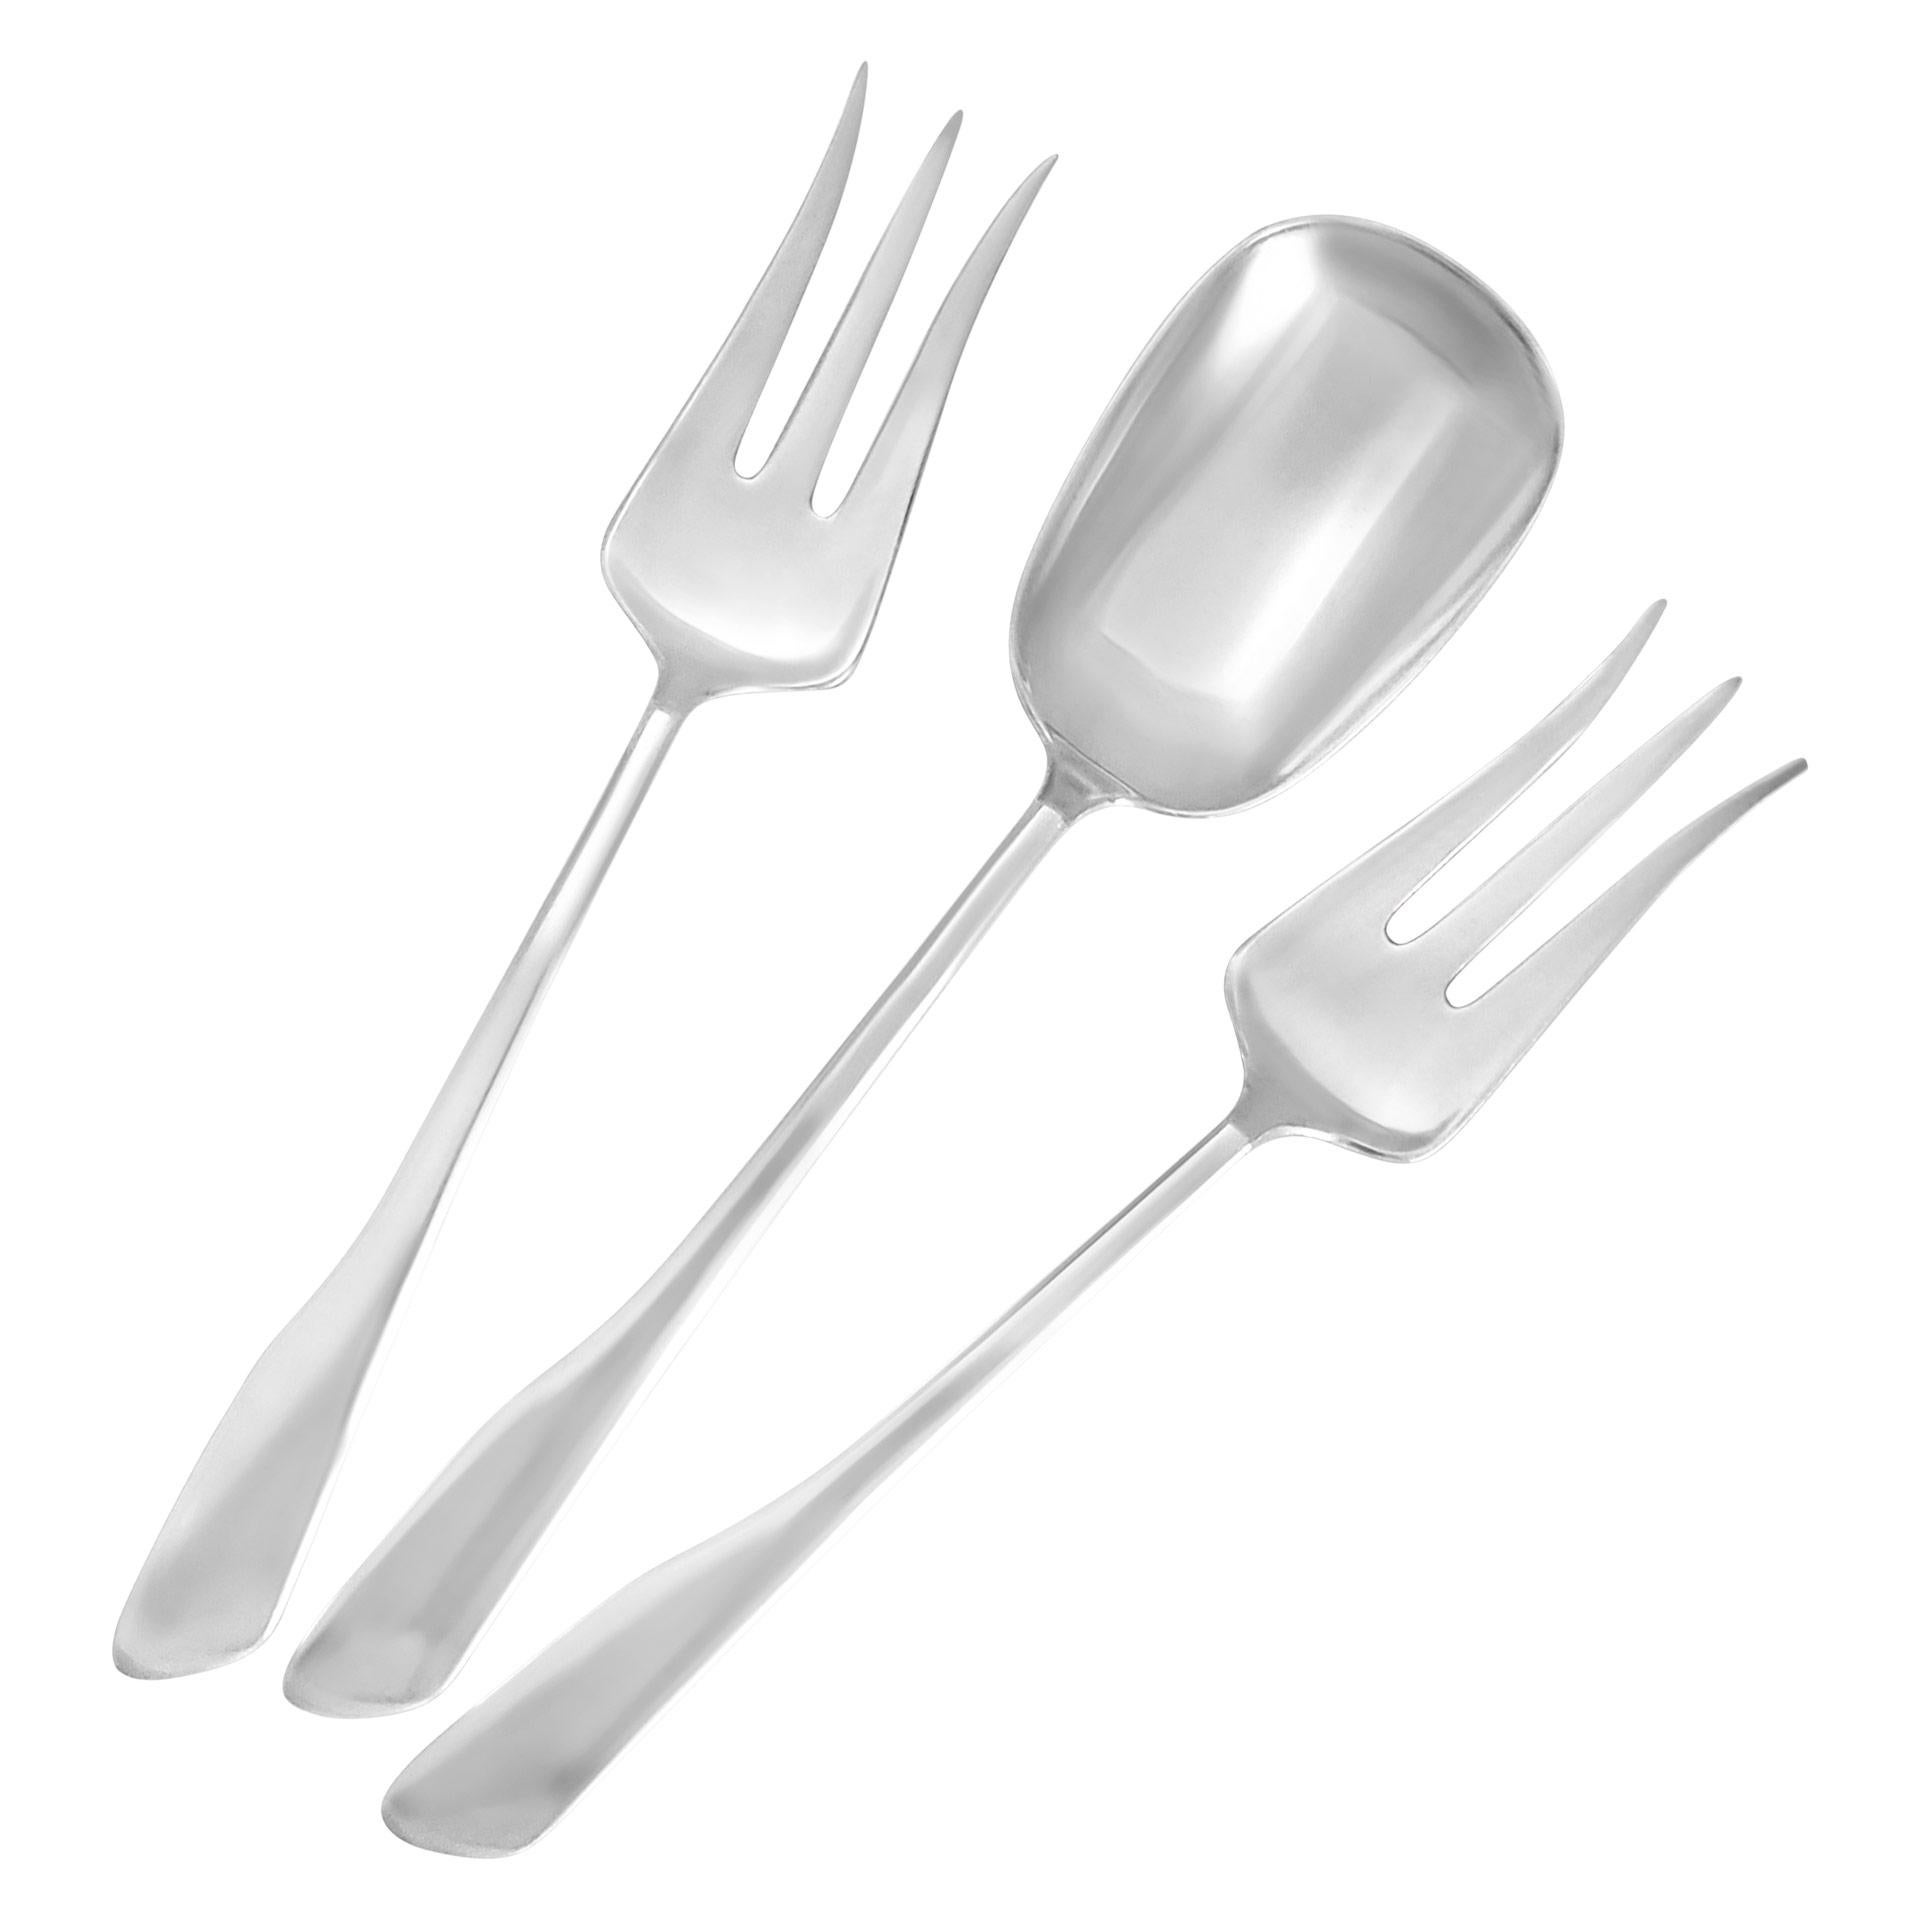 GRETA from Olga Morensen, sterling silver flatware set with misc. Danish sterling silver serving pieces from Frigast & H.H.R-  6 place setting for 12  with 10 serving pieces.Over 3500 grams of Danish Sterling silver (113 ounces troy) no counting